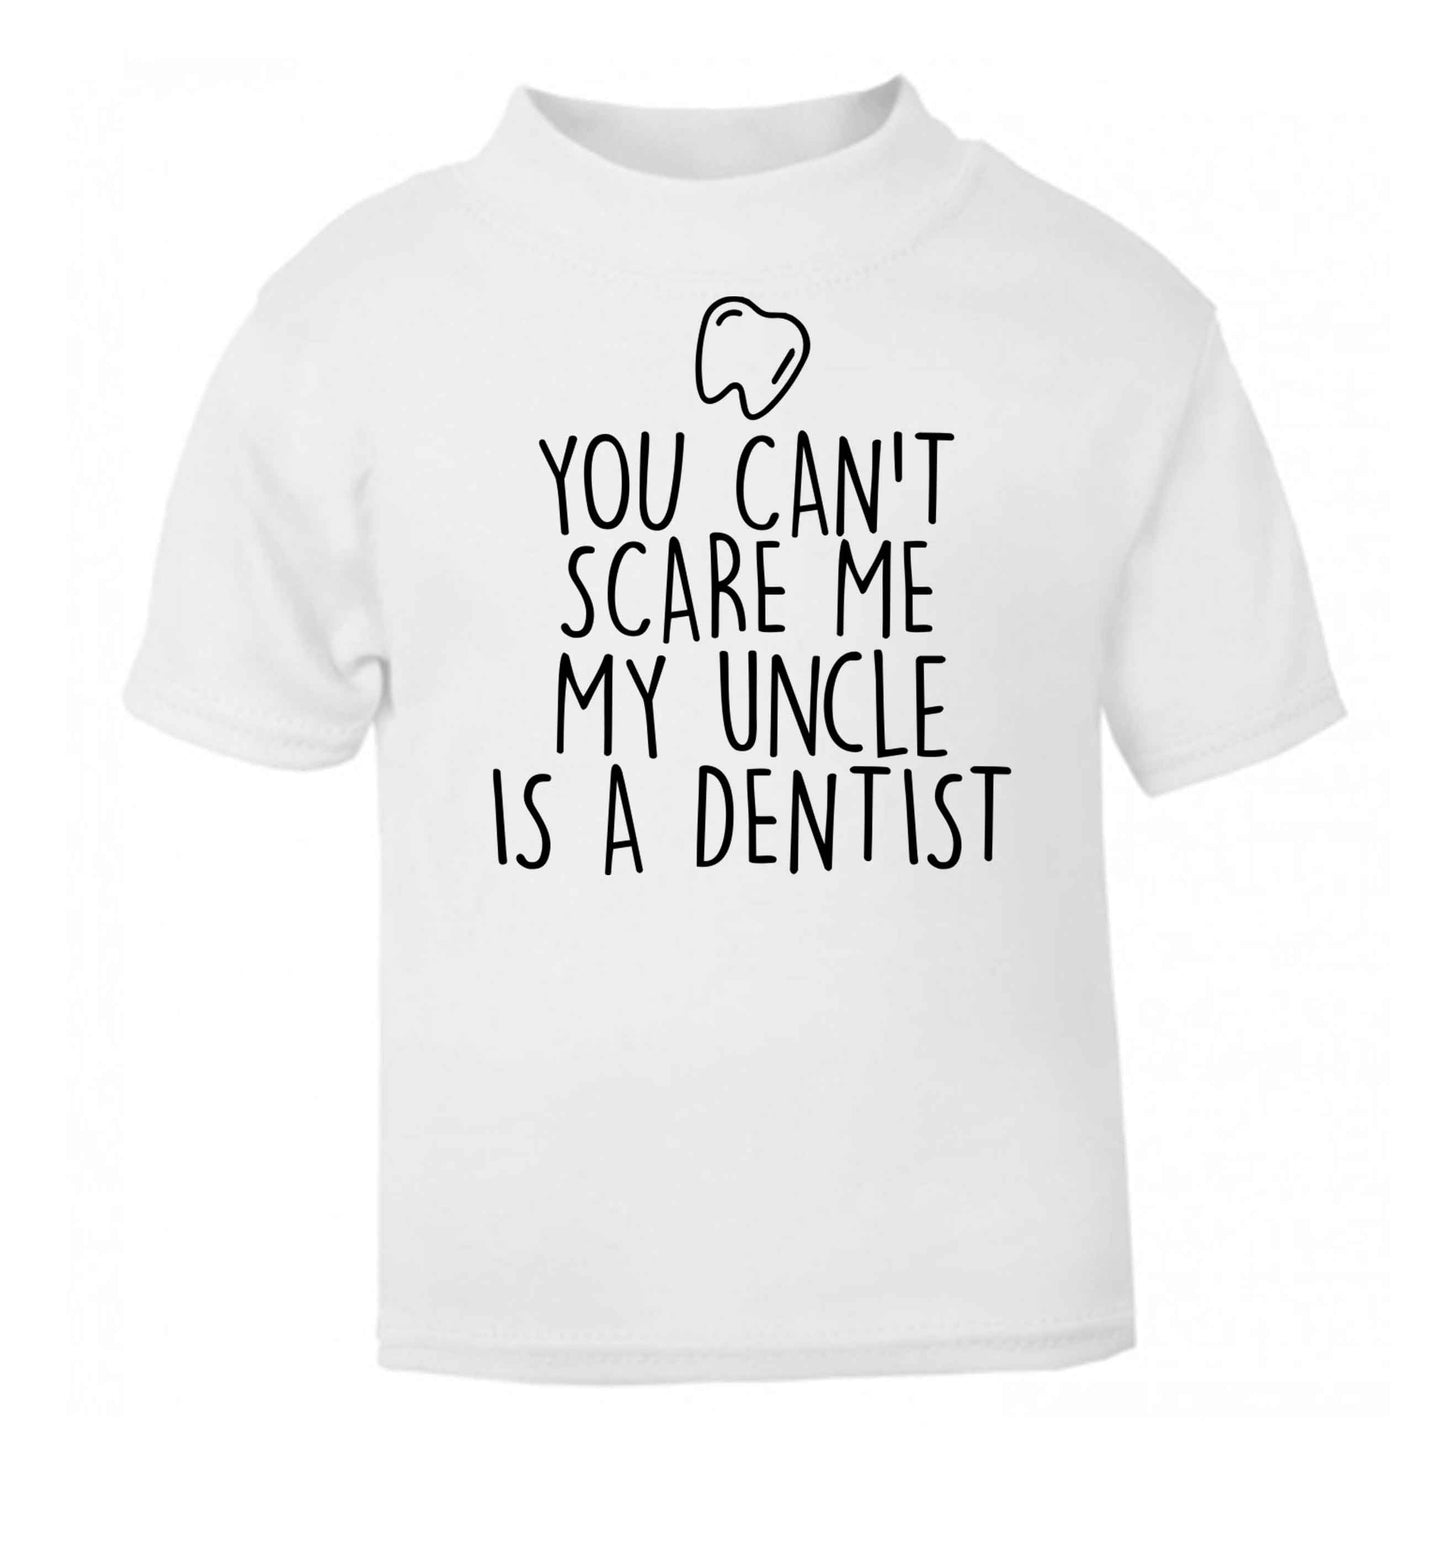 You can't scare me my uncle is a dentist white baby toddler Tshirt 2 Years